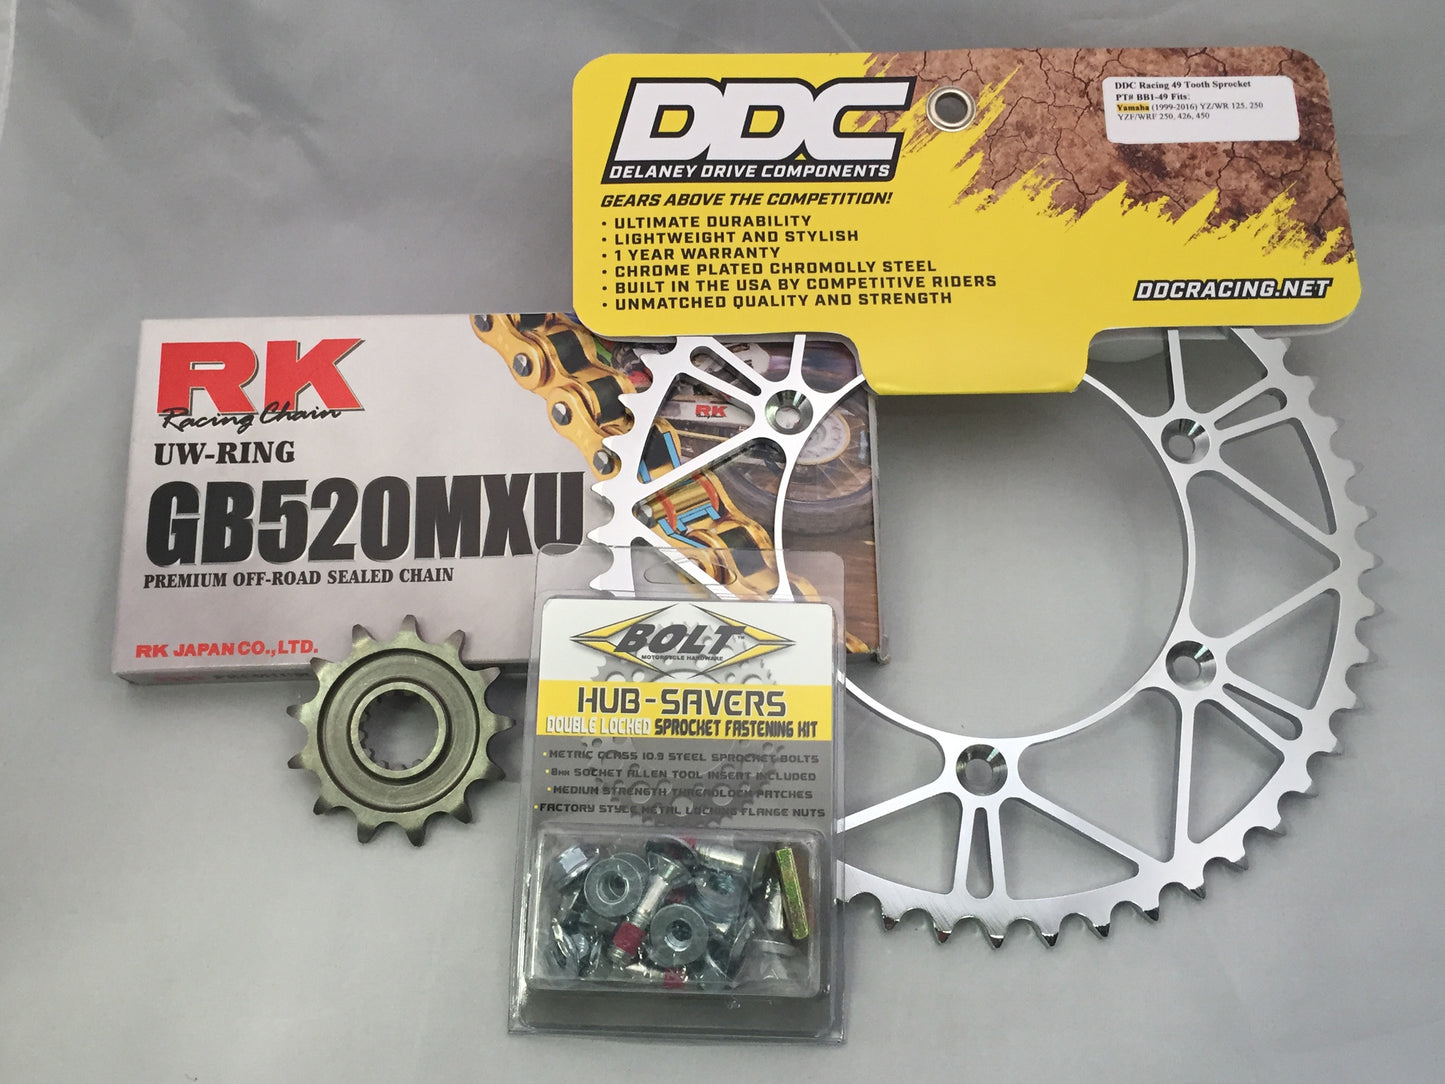 DDC Sprocket and chain combo kit